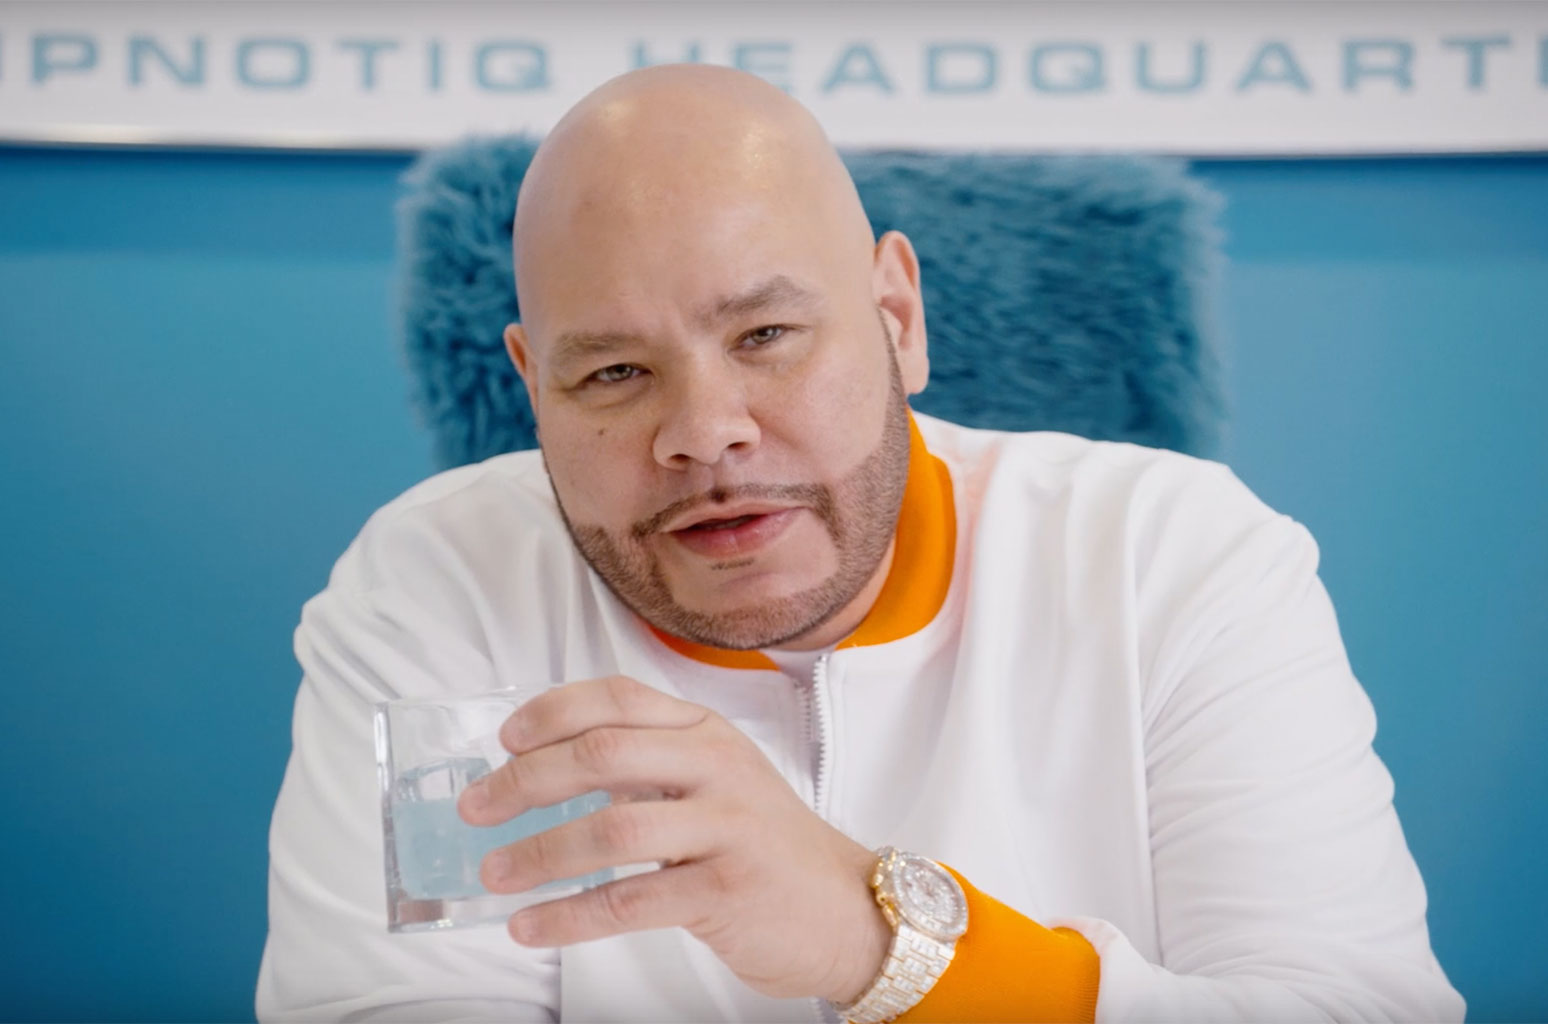 Fat Joe Teams Up With Hpnotiq For OG Campaign, Drops 'Pullin' Video With Lil Wayne- Exclusive - deals in retail news